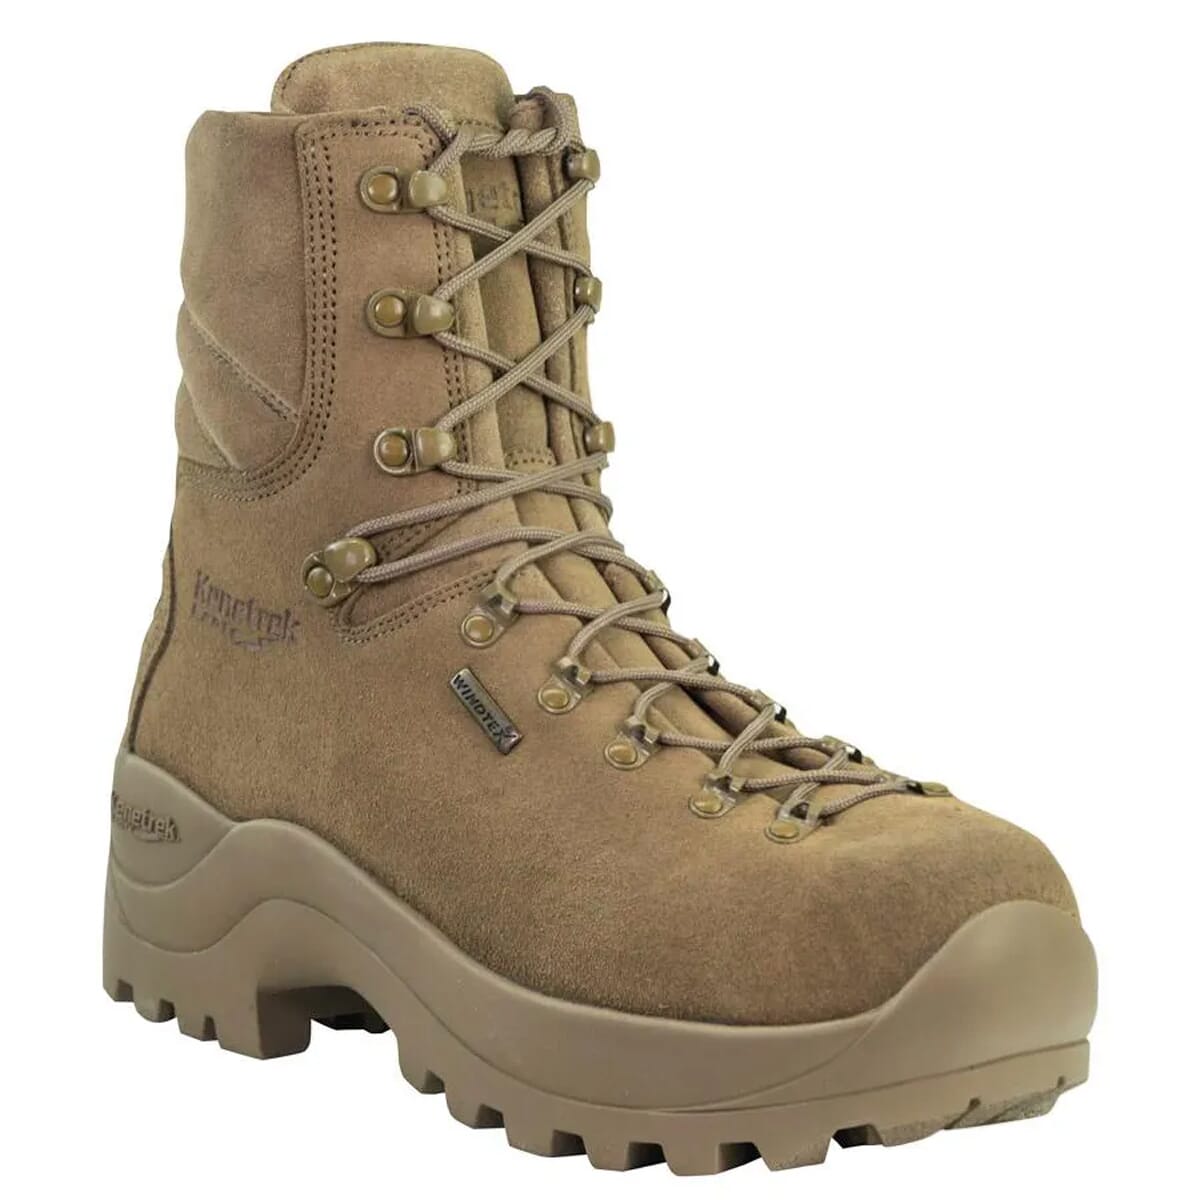 Kenetrek Leather Personnel Carrier Non-Insulated Coyote Brown 10.5W Work Boots KE-430-NI-10.5W